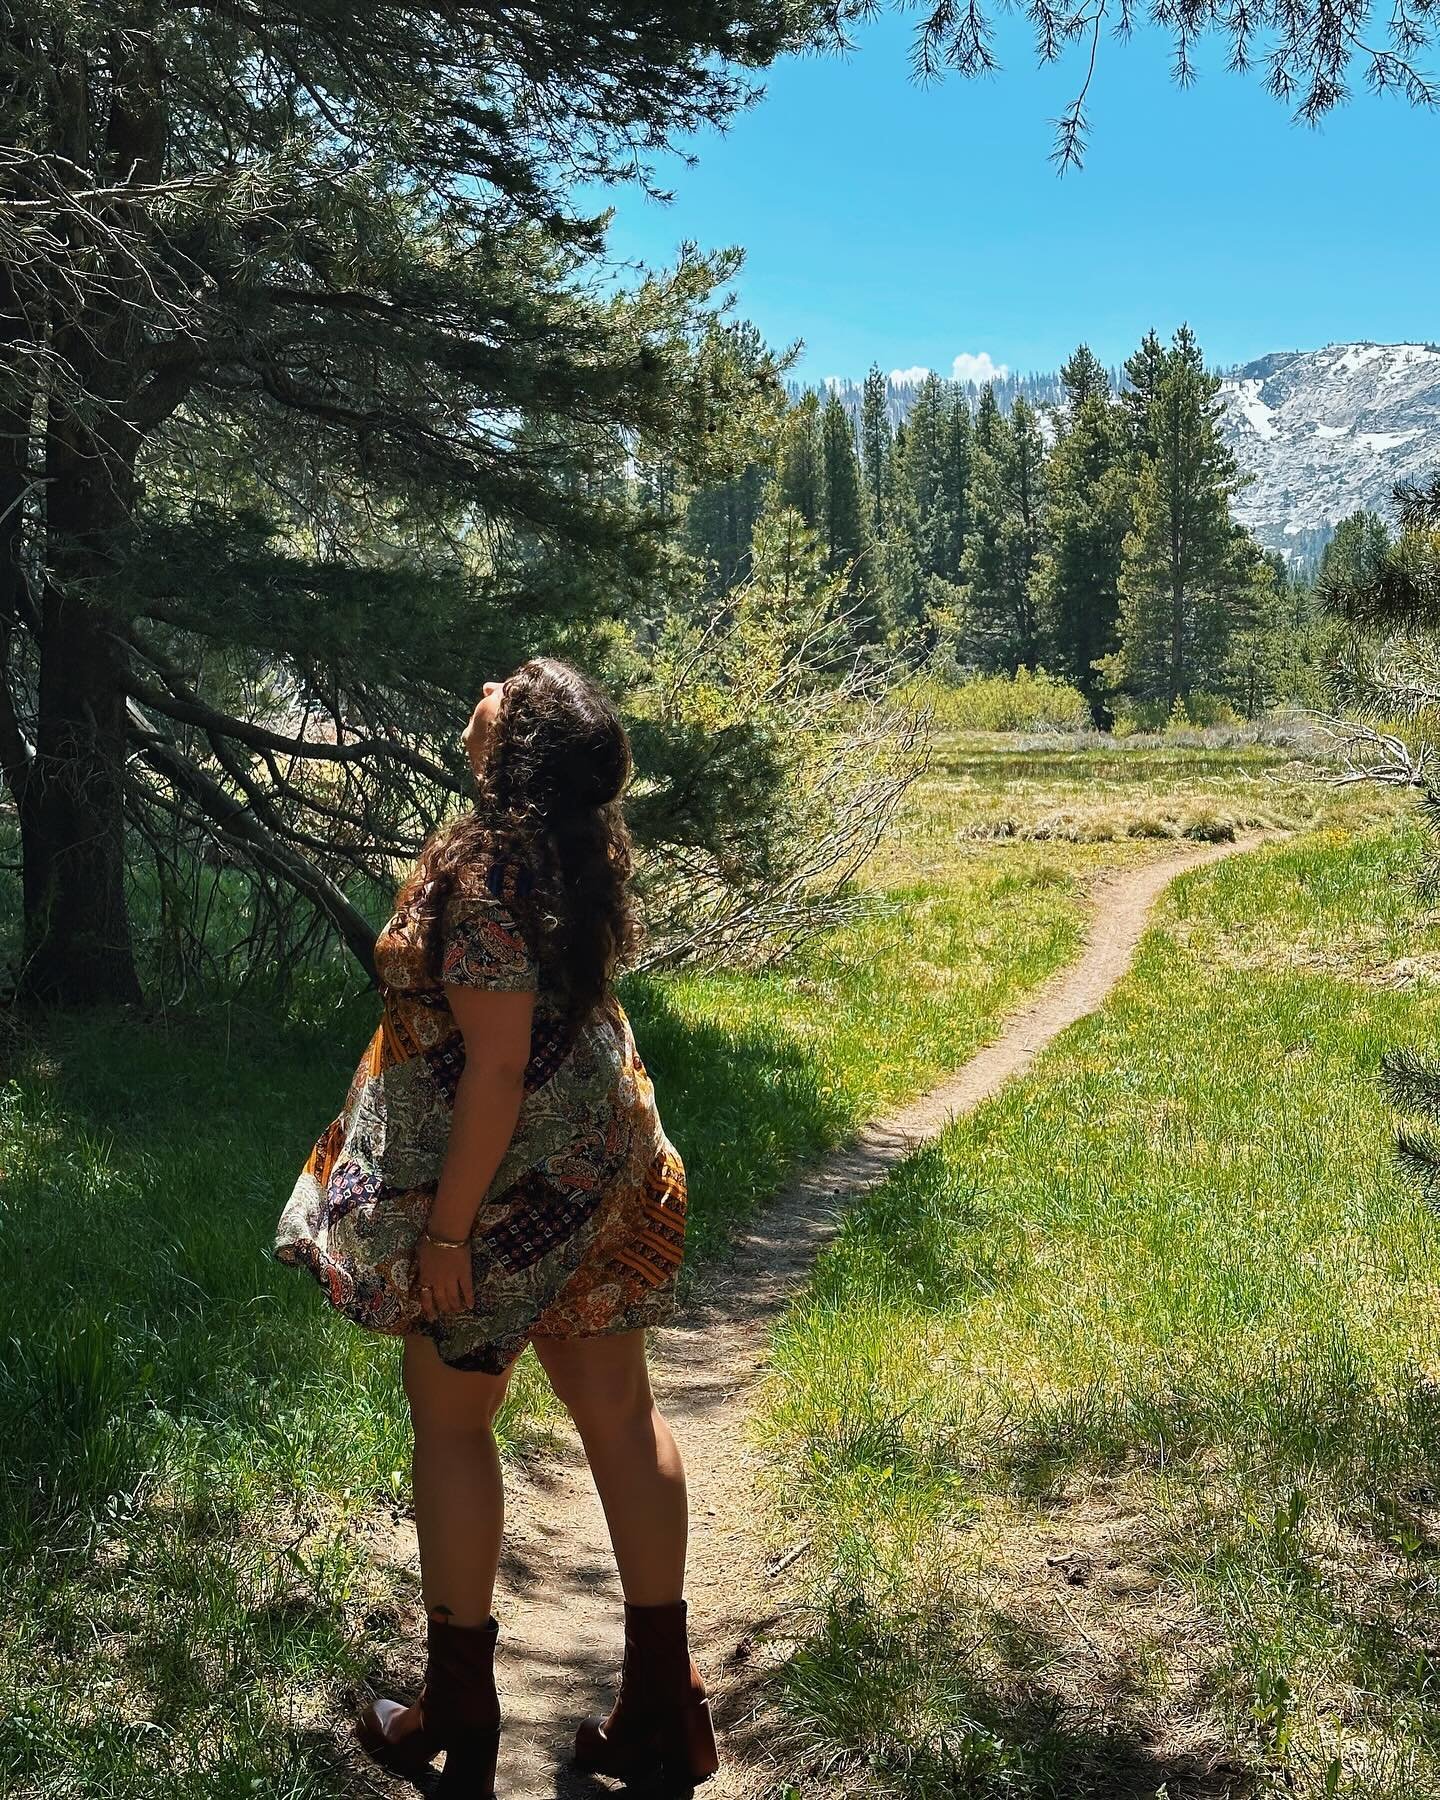 The wind was an unpaid actor🌬️

Back to frolicking in the woods &amp; being grateful for life🌷